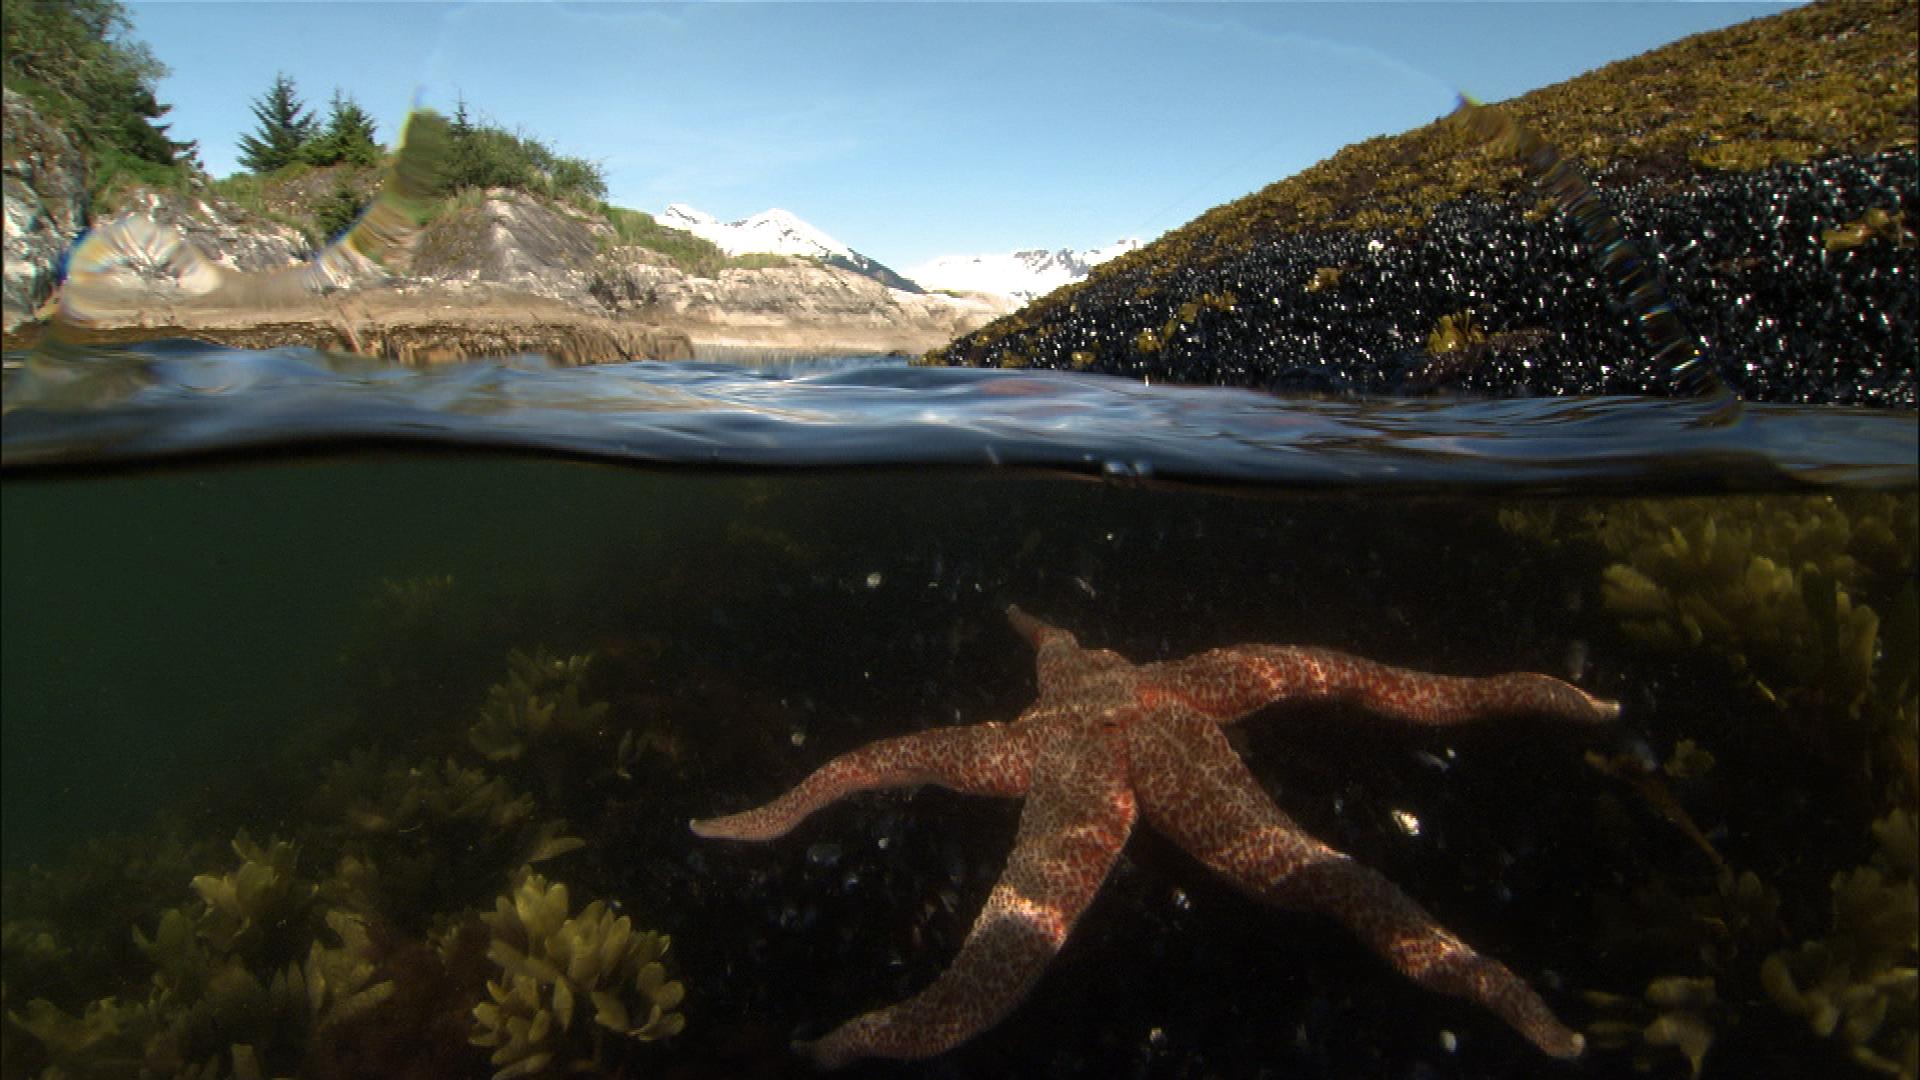 A sea star just below the water on a group of mussels. Forested rocky islands stand above water.